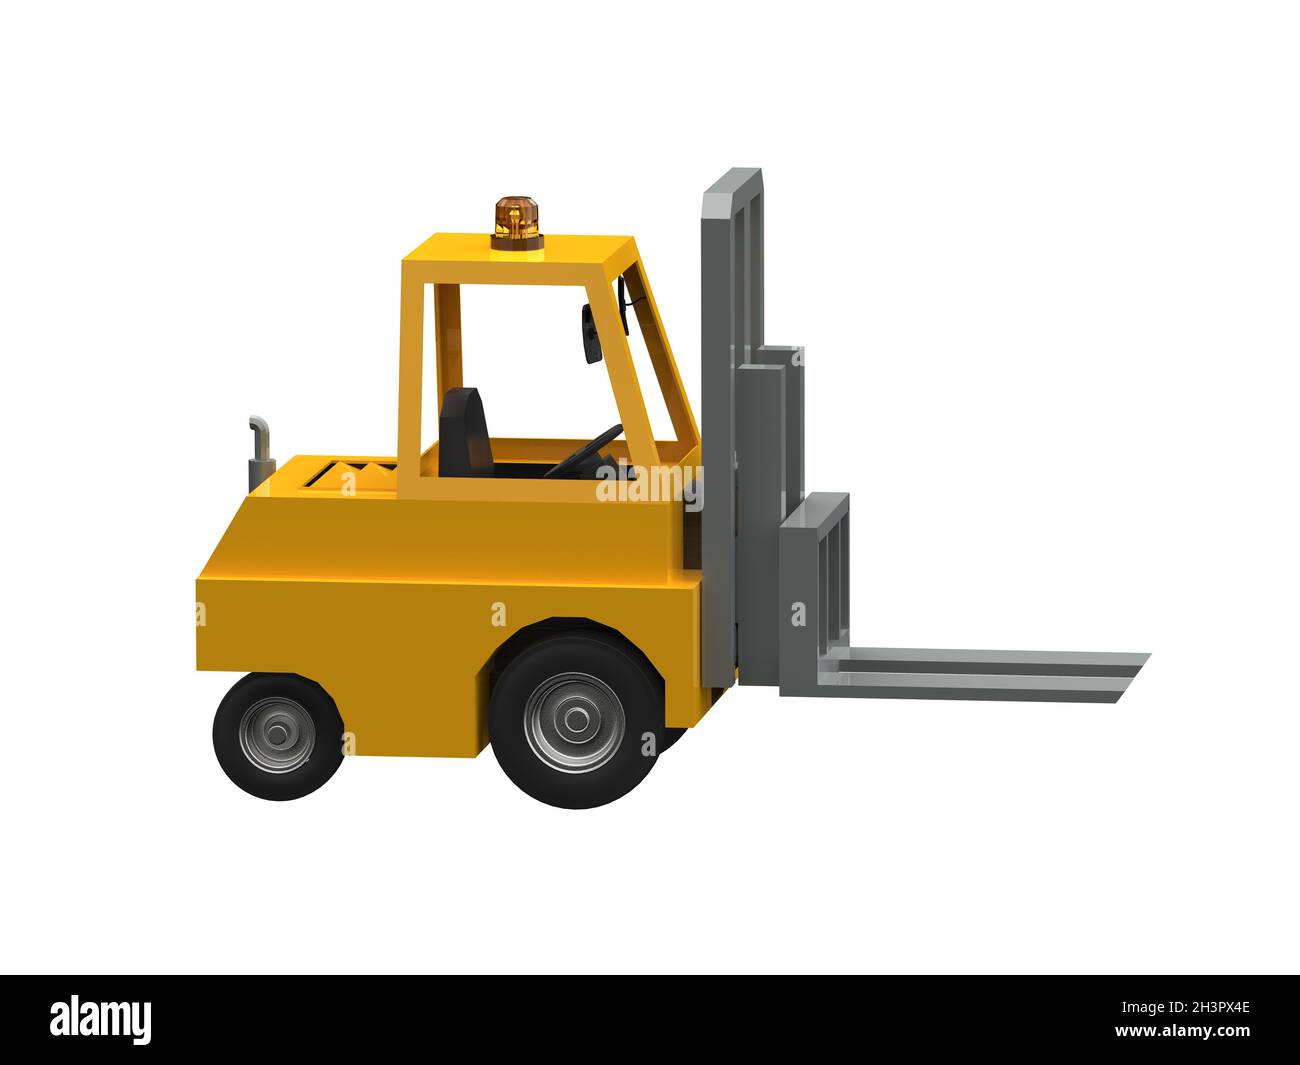 3d Lowpoly Icon Forklift Truck Loader Cartoon Style Isolated on White Background Stock Photo